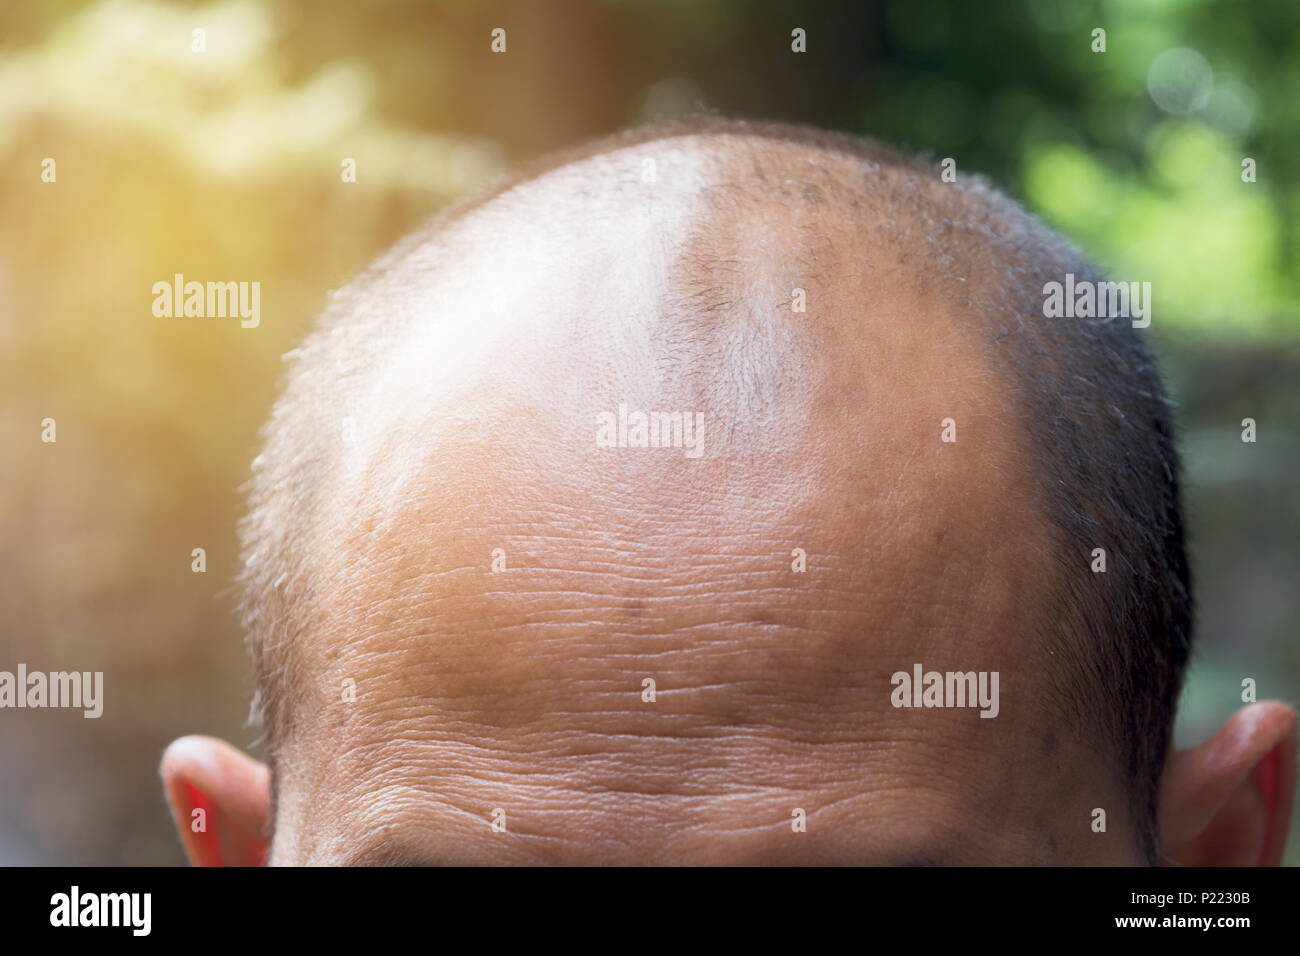 Head of man lose one's hair, glabrous on his head for elderly man. Stock Photo